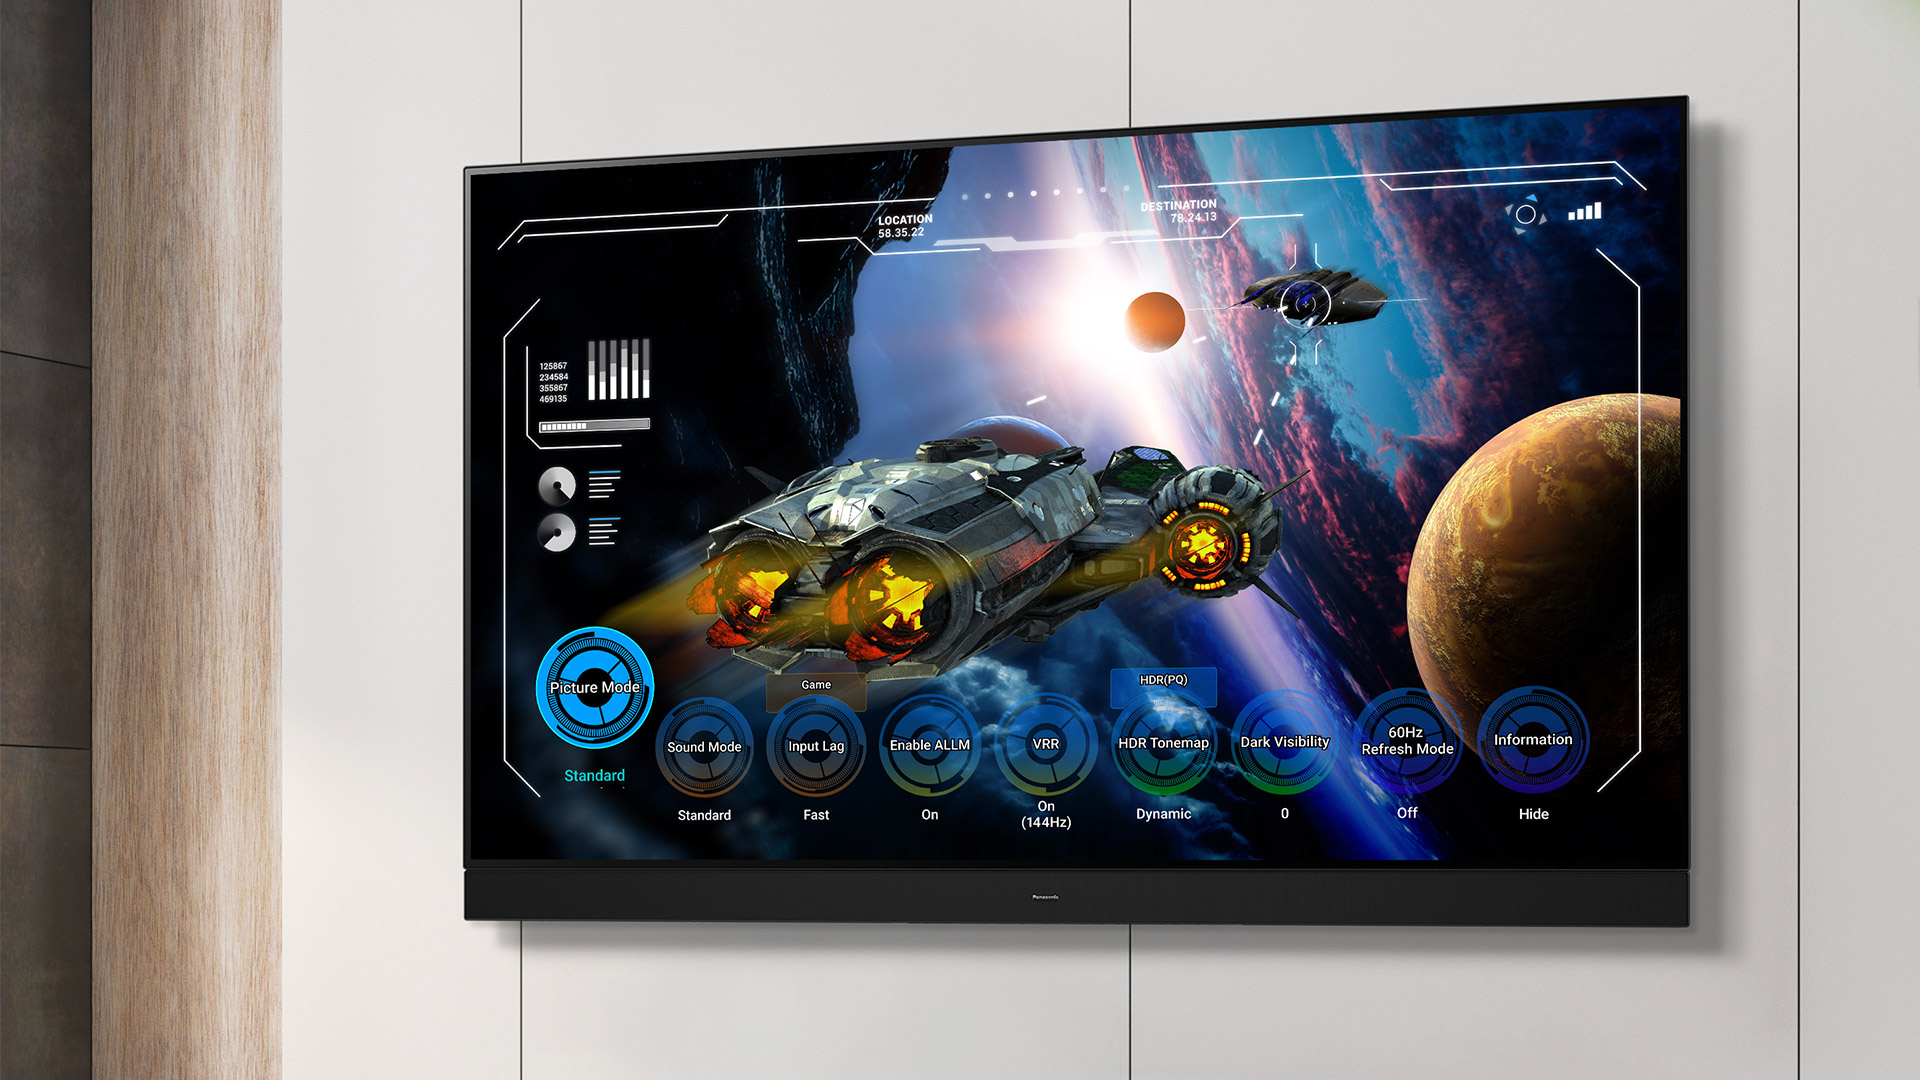 The Panasonic Z95A/Z93A OLED TVs in gaming mode